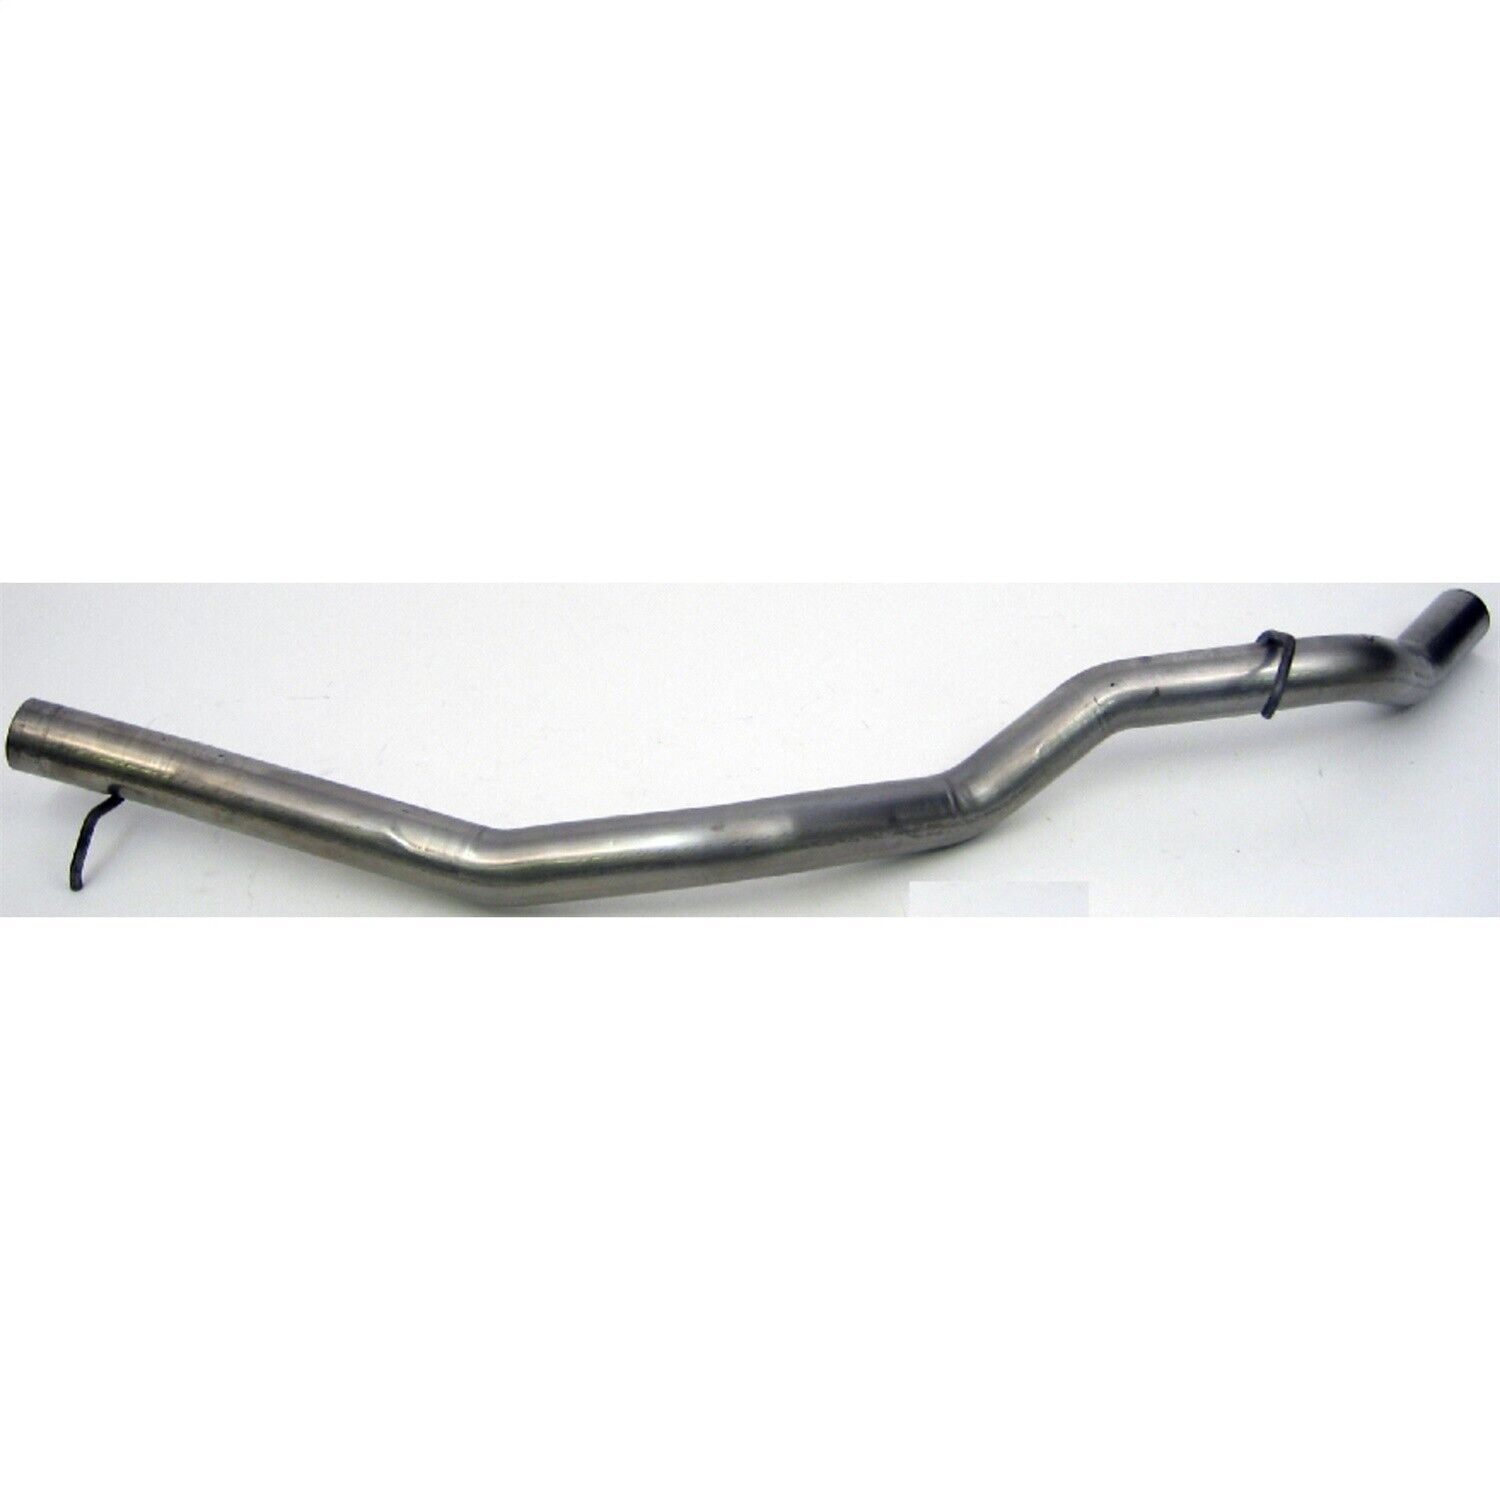 Dynomax 55222 Single System Tail Pipe Fits 96-03 S10 Pickup Sonoma